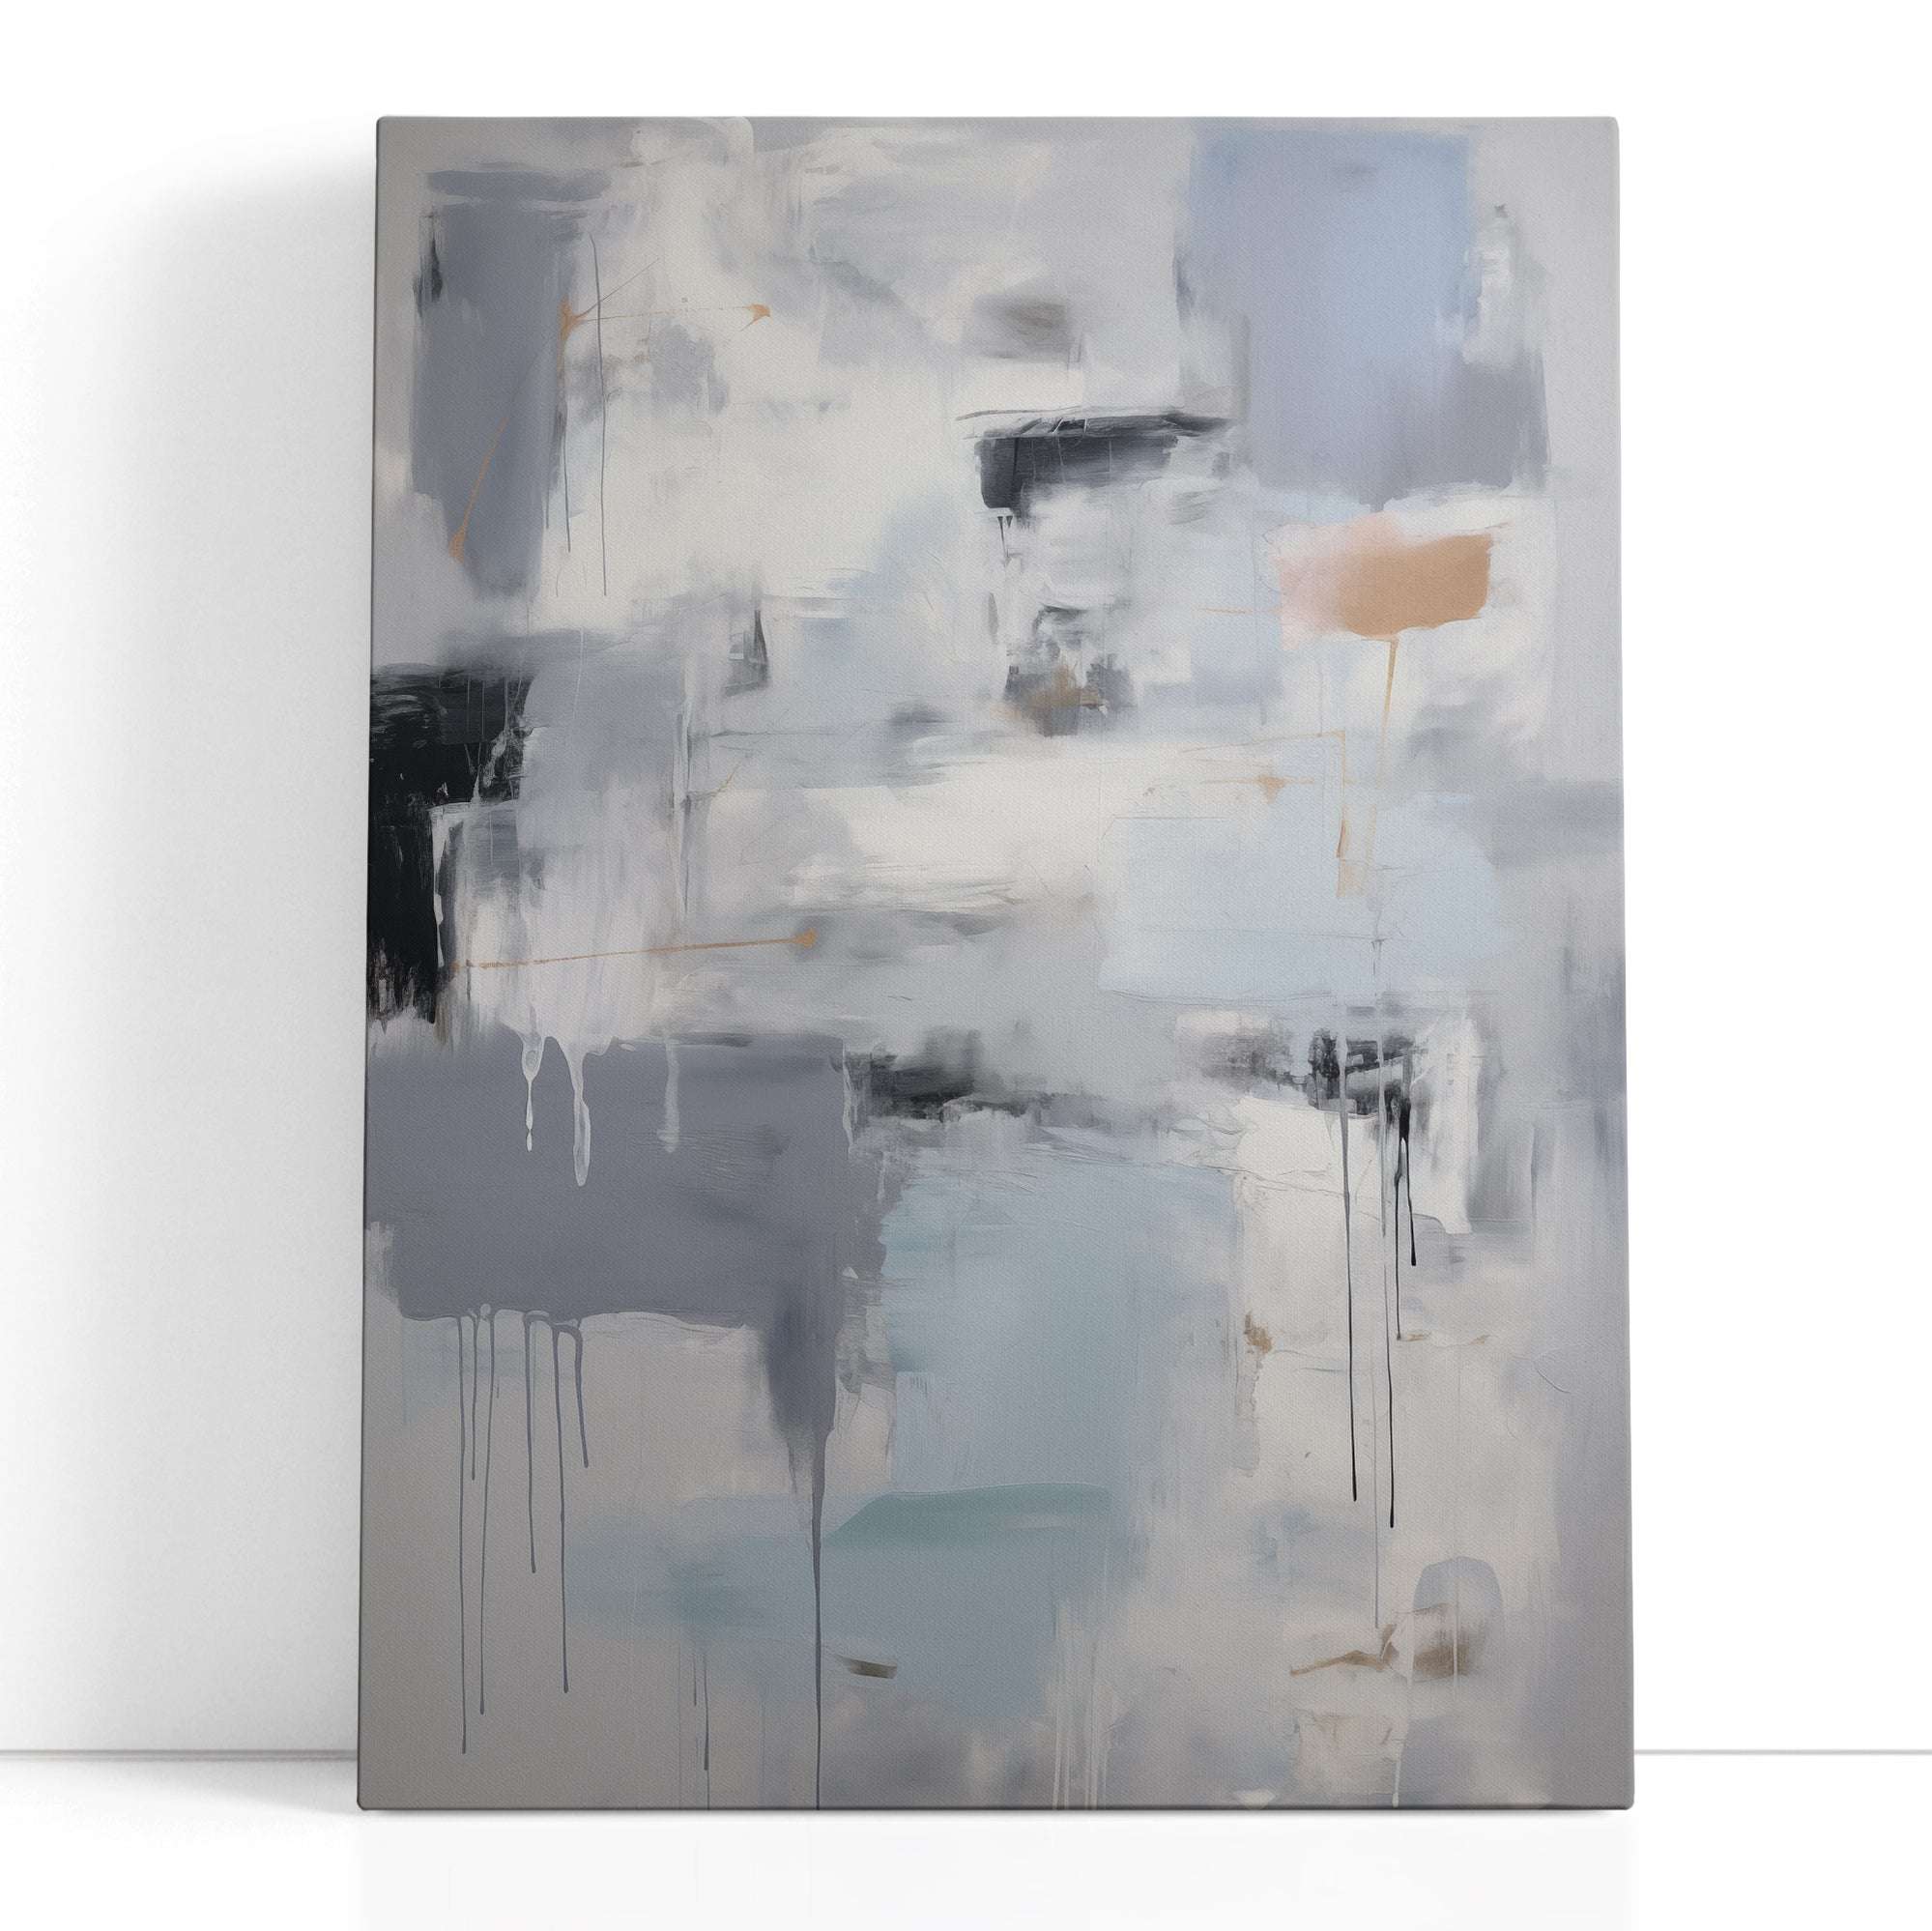 Abstract Grays and Whites with Blue Accents - Canvas Print - Artoholica Ready to Hang Canvas Print